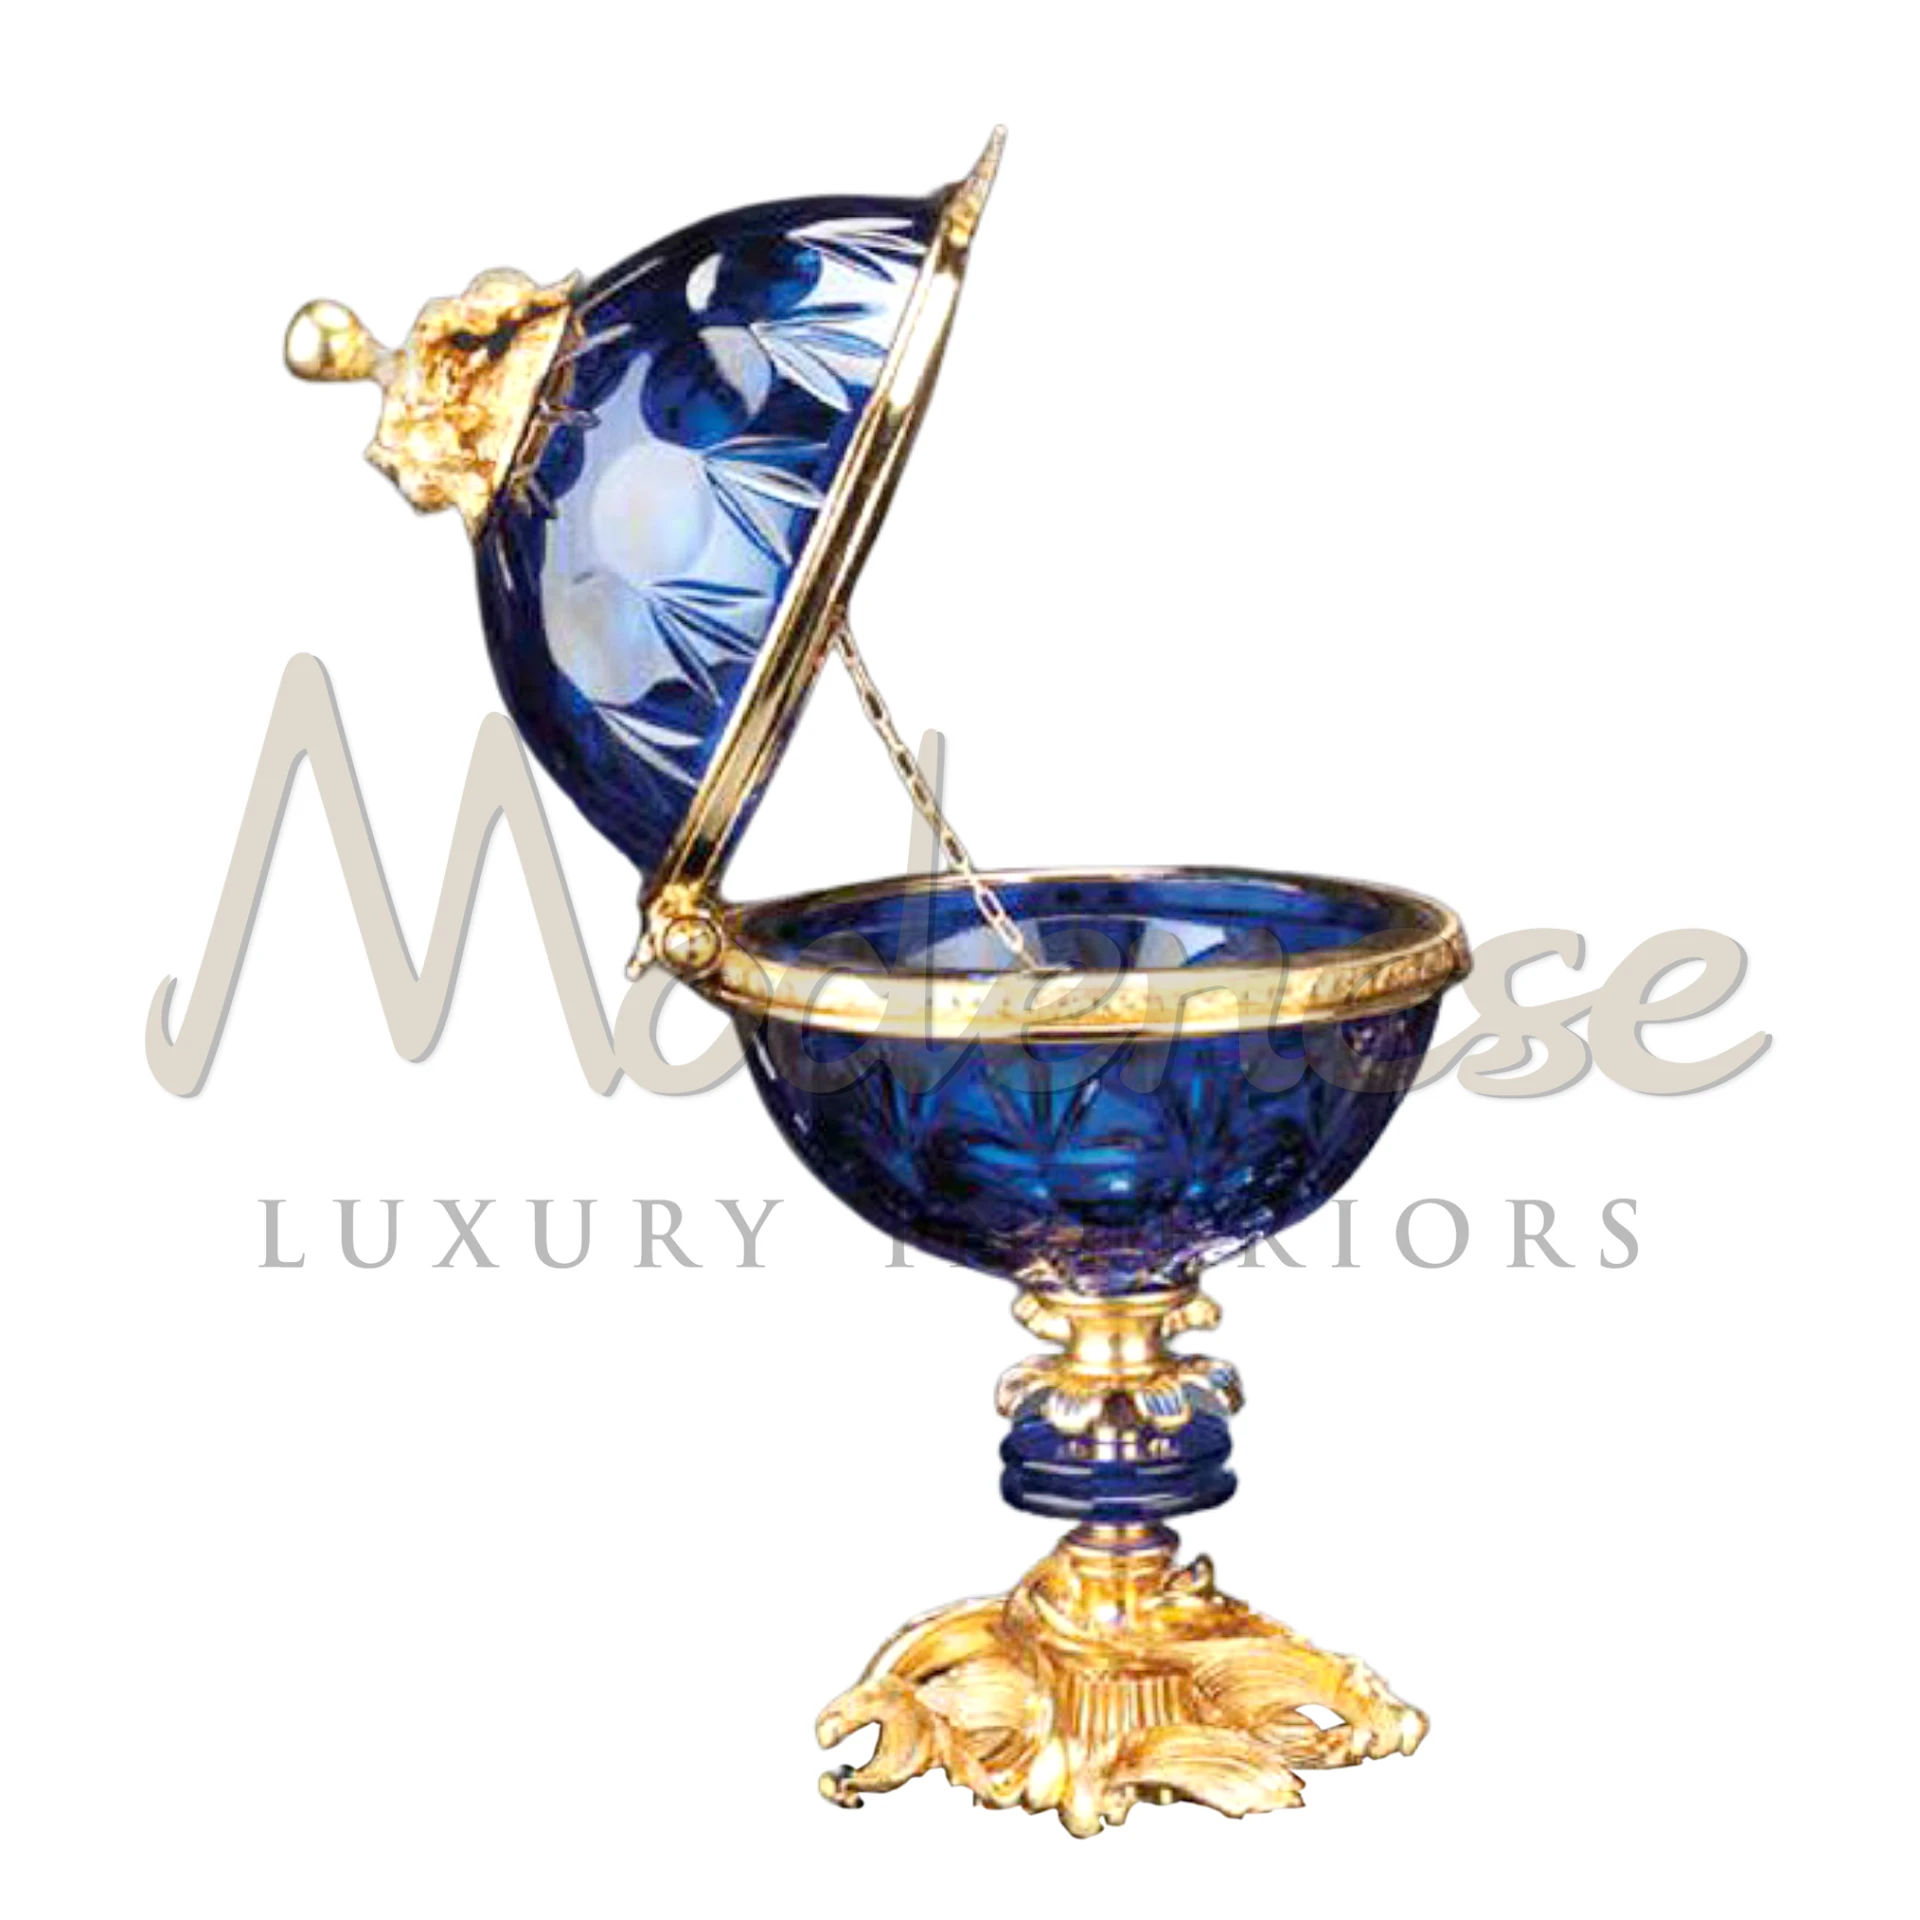 Traditional Royal Blue Box, crafted with elegance and traditional charm in wood, metal, or glass, featuring intricate designs, ideal for luxurious and classic interiors.






